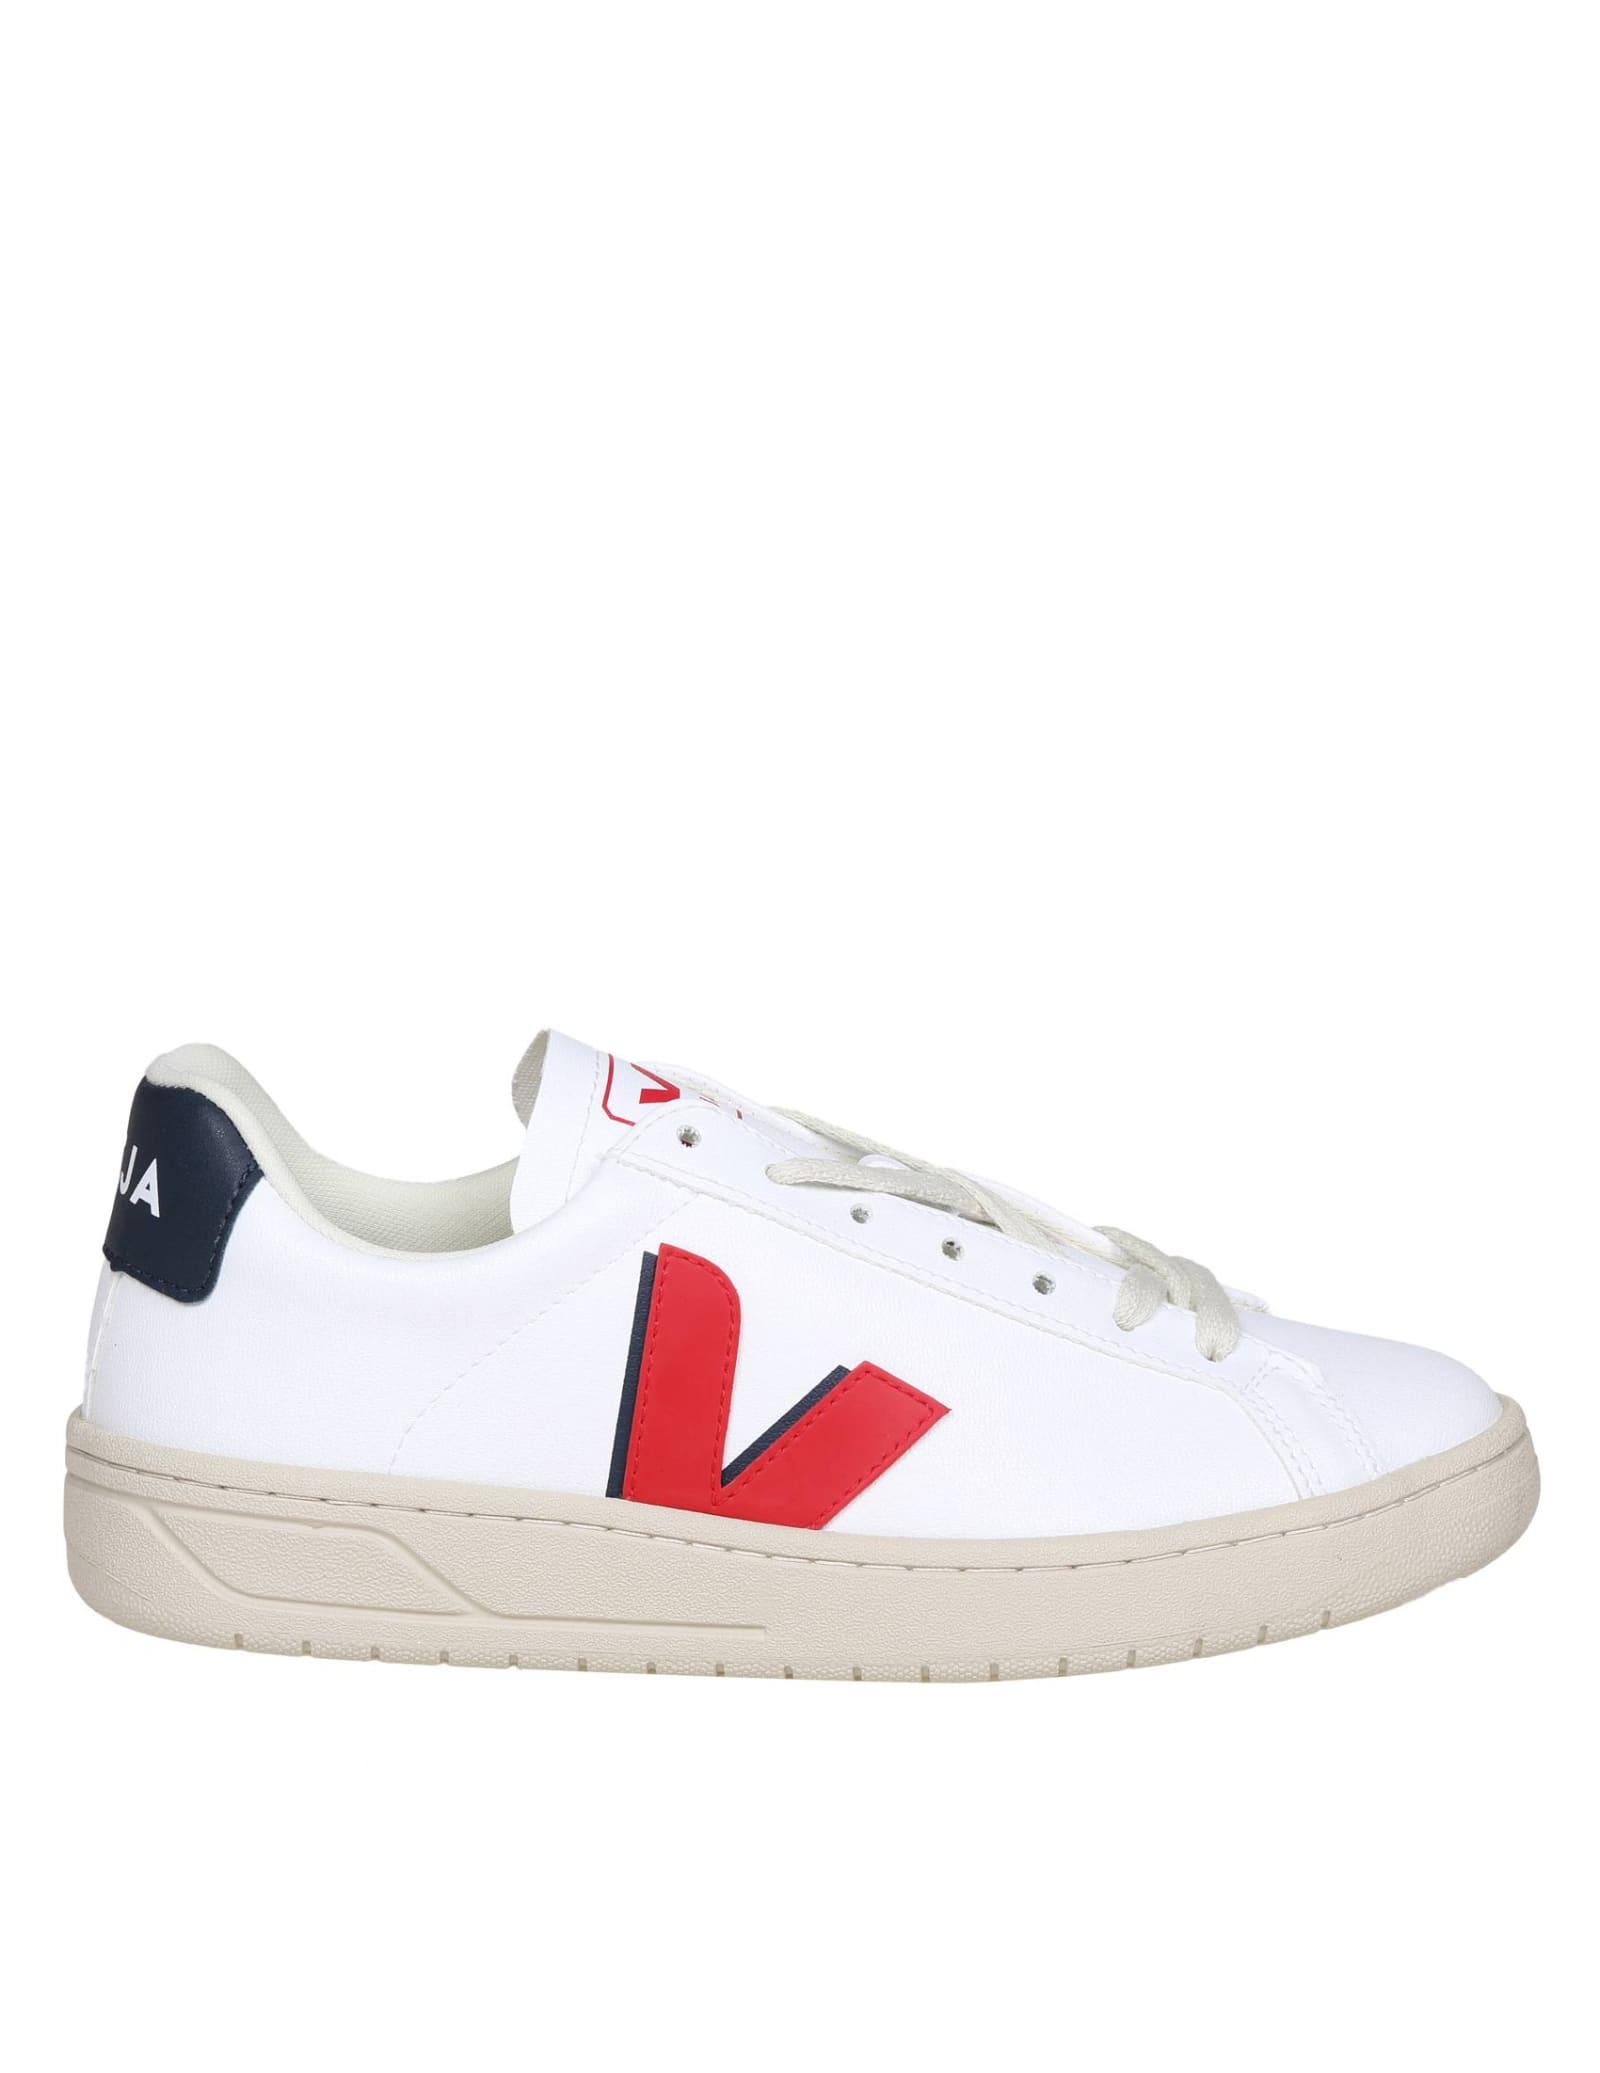 Shop Veja Campo Chromefree In White/red Leather